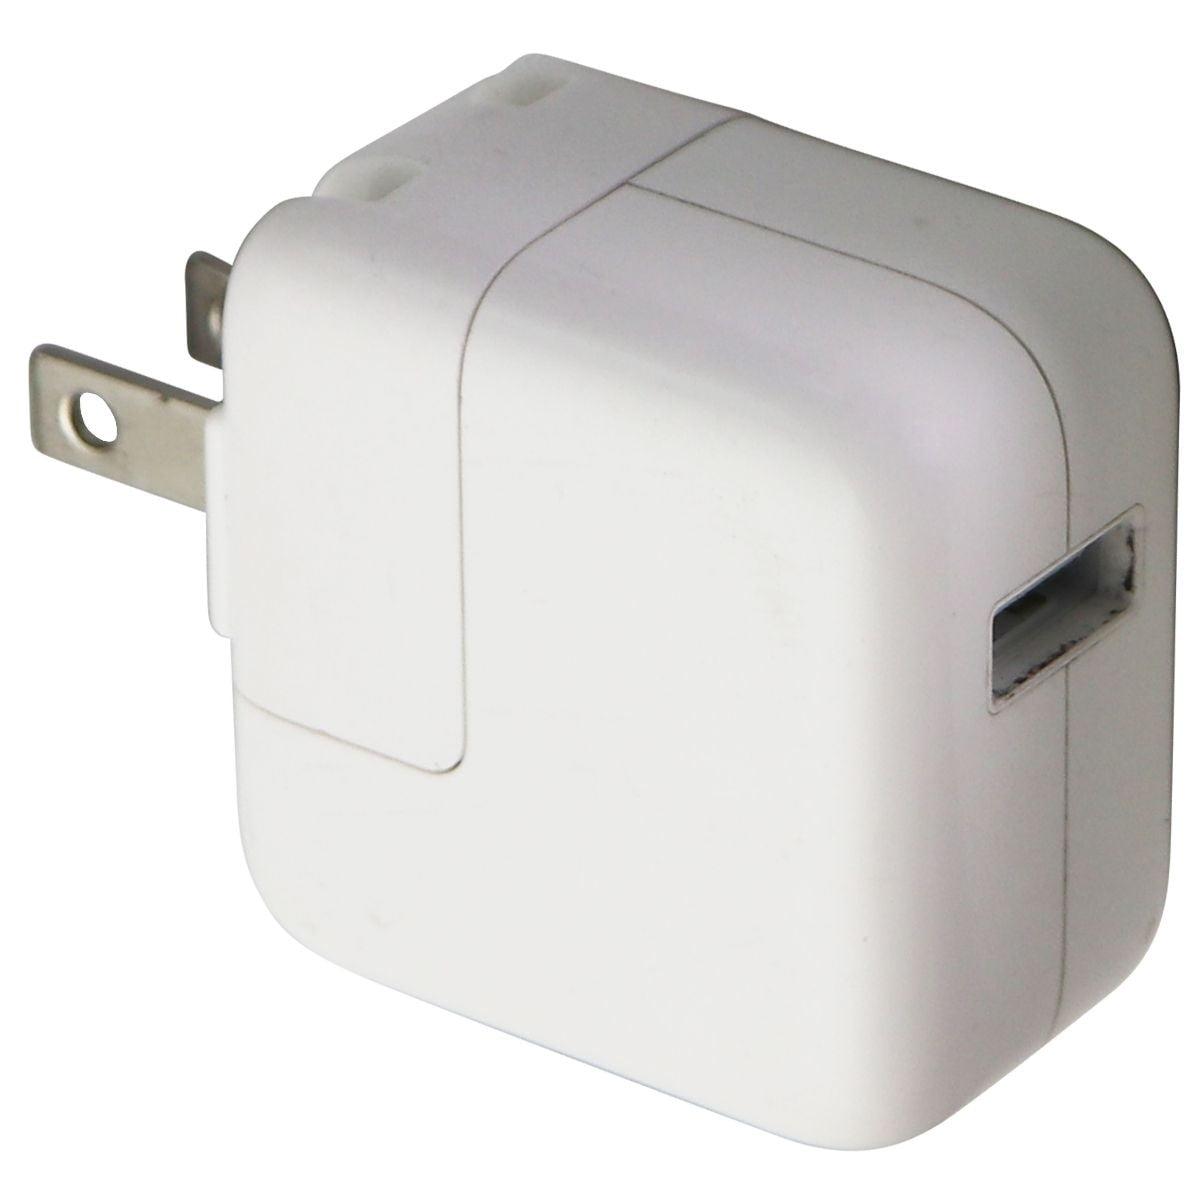 (Refurbished) 12W Power Adapter Wall Restored (MD836LL/A - USB Charger - Single Apple White A1401)